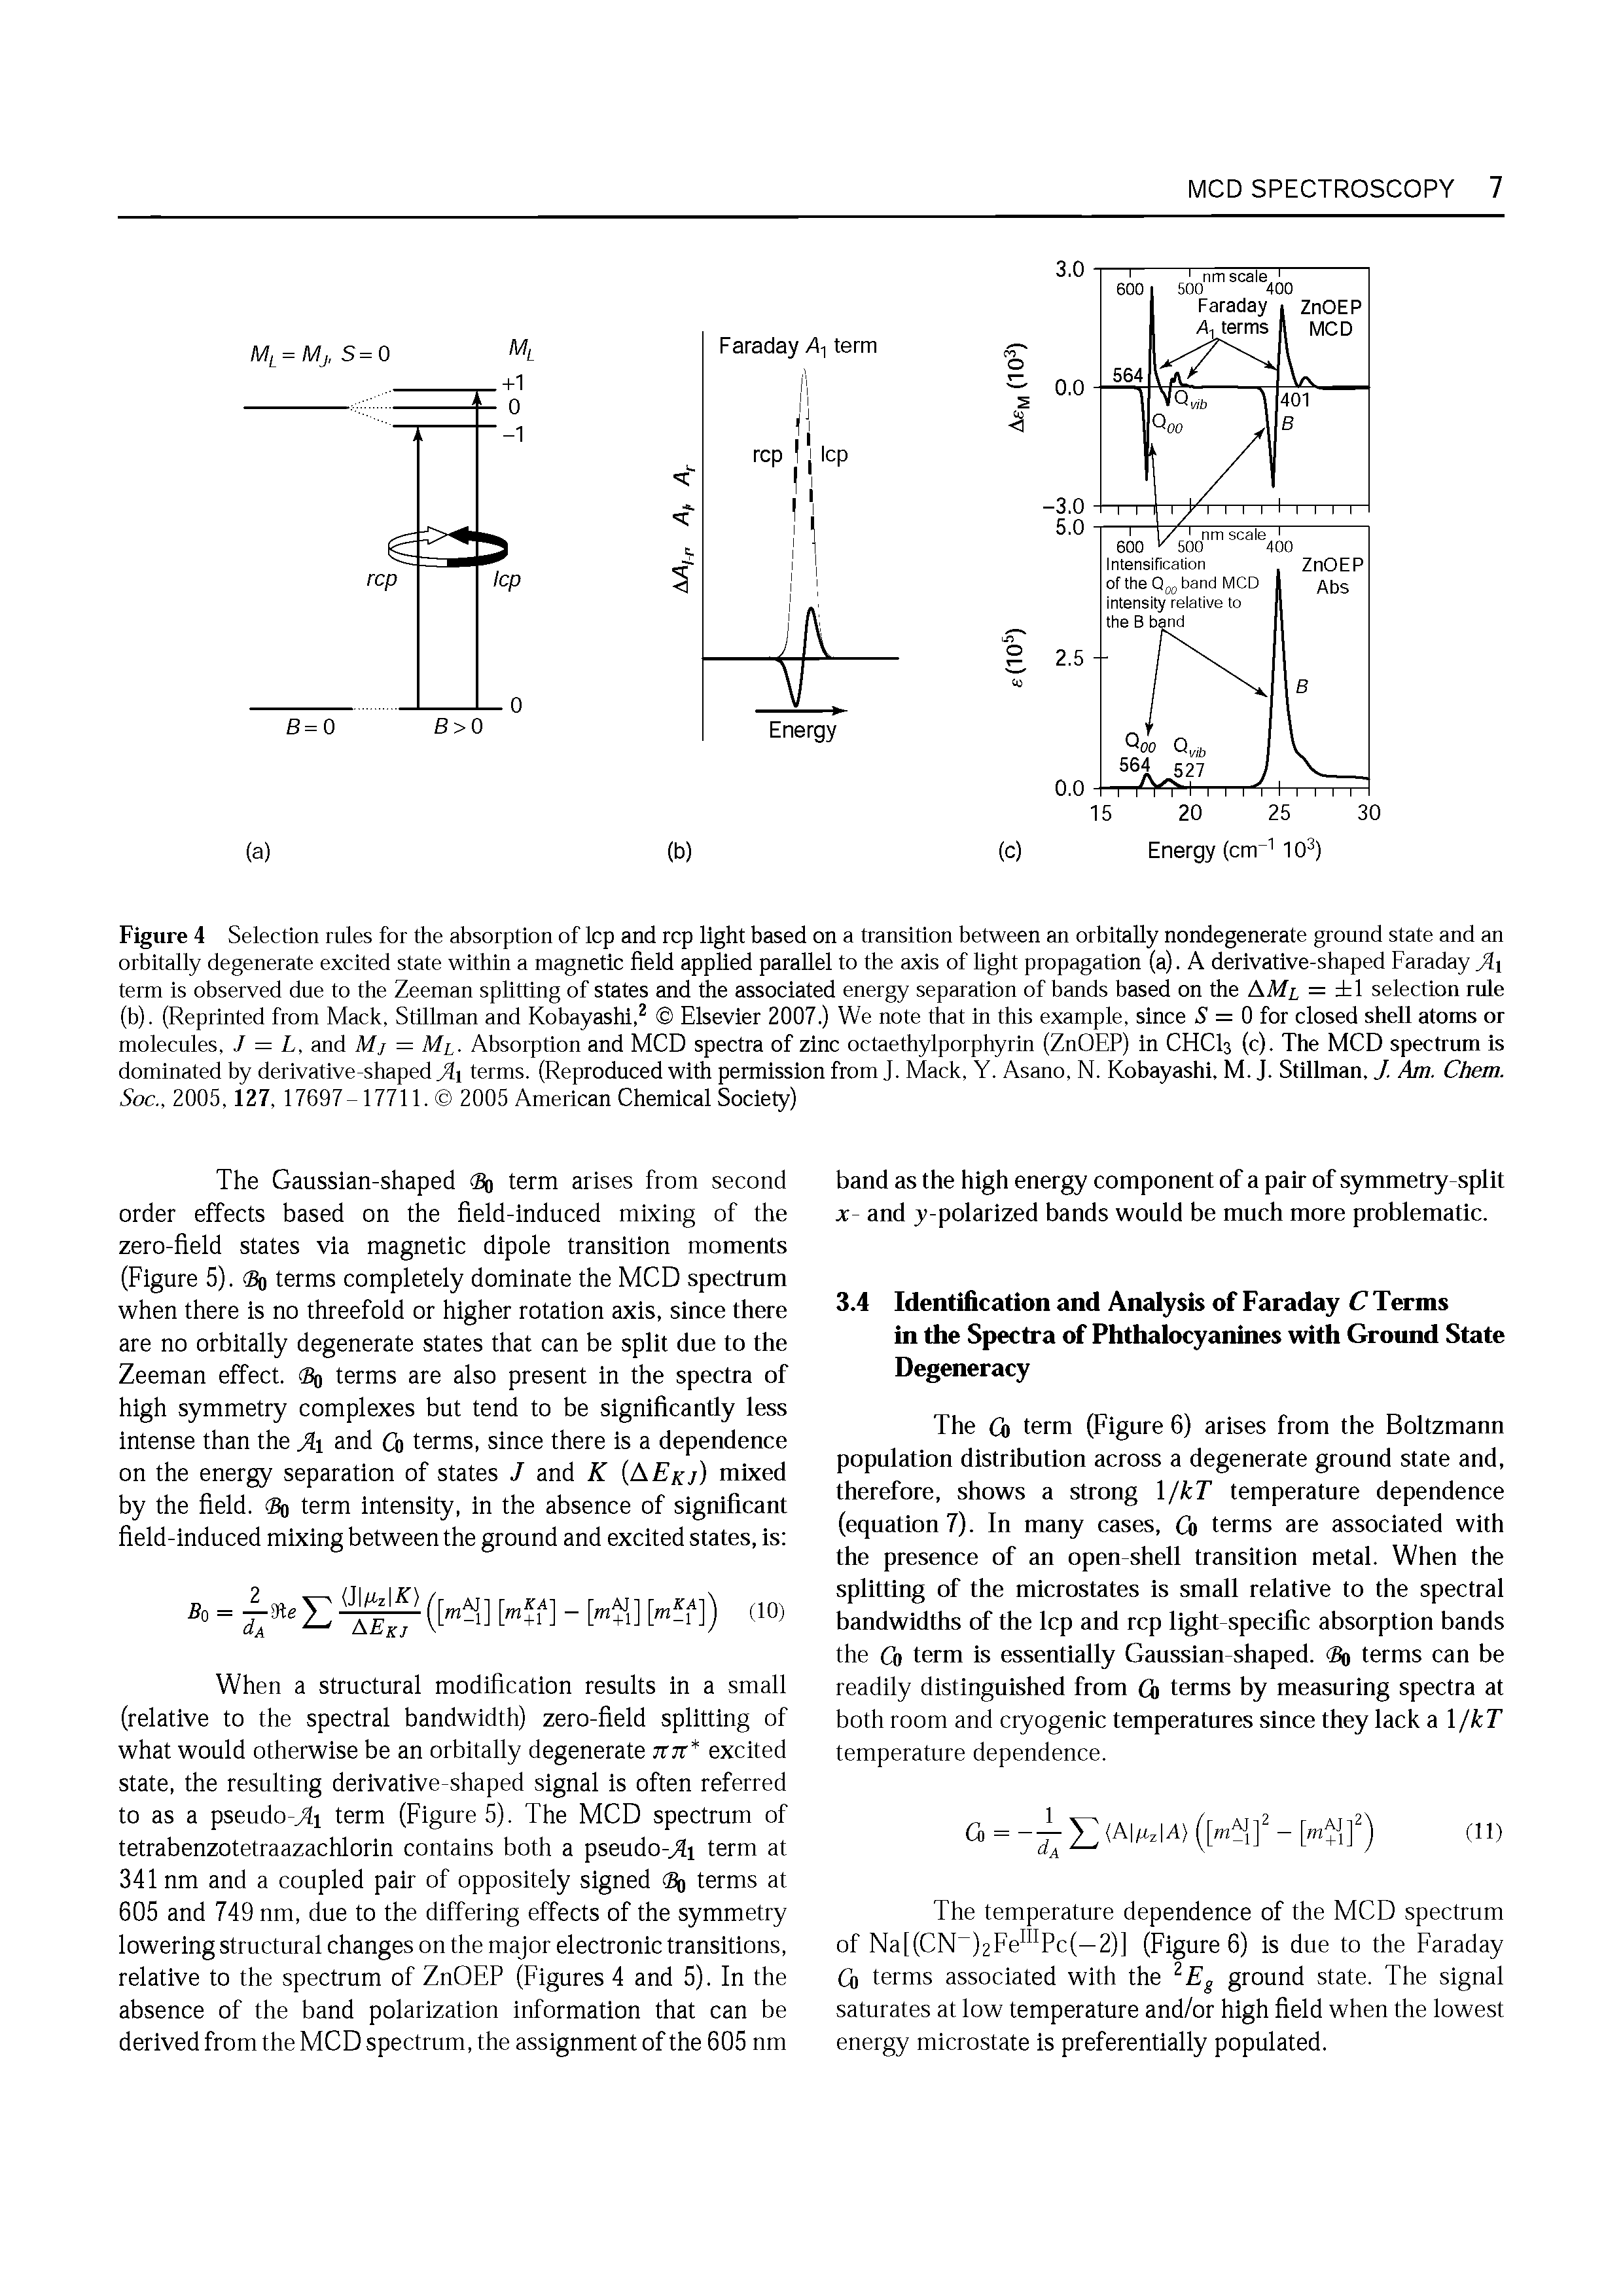 Figure 4 Selection rules for the absorption of Icp and rep light based on a transition between an orbitally nondegenerate ground state and an orbitally degenerate excited state within a magnetic field applied parallel to the axis of light propagation (a). A derivative-shaped Faraday Ai term is observed due to the Zeeman splitting of states and the associated energy separation of bands based on the AMl = 1 selection rule (b). (Reprinted from Mack, Stillman and Kobayashi, Elsevier 2007.) We note that in this example, since 5 = 0 for closed shell atoms or molecules, J = L, and Mj = Ml. Absorption and MCD spectra of zinc octaethylporphyrin (ZnOEP) in CHCI3 (c). The MCD spectrum is dominated by derivative-shaped Ai terms. (Reproduced with permission from J. Mack, Y. Asano, N. Kobayashi, M. J. Stillman, J. Am. Chem. Soc., 2005,127, 17697-17711. 2005 American Chemical Society)...